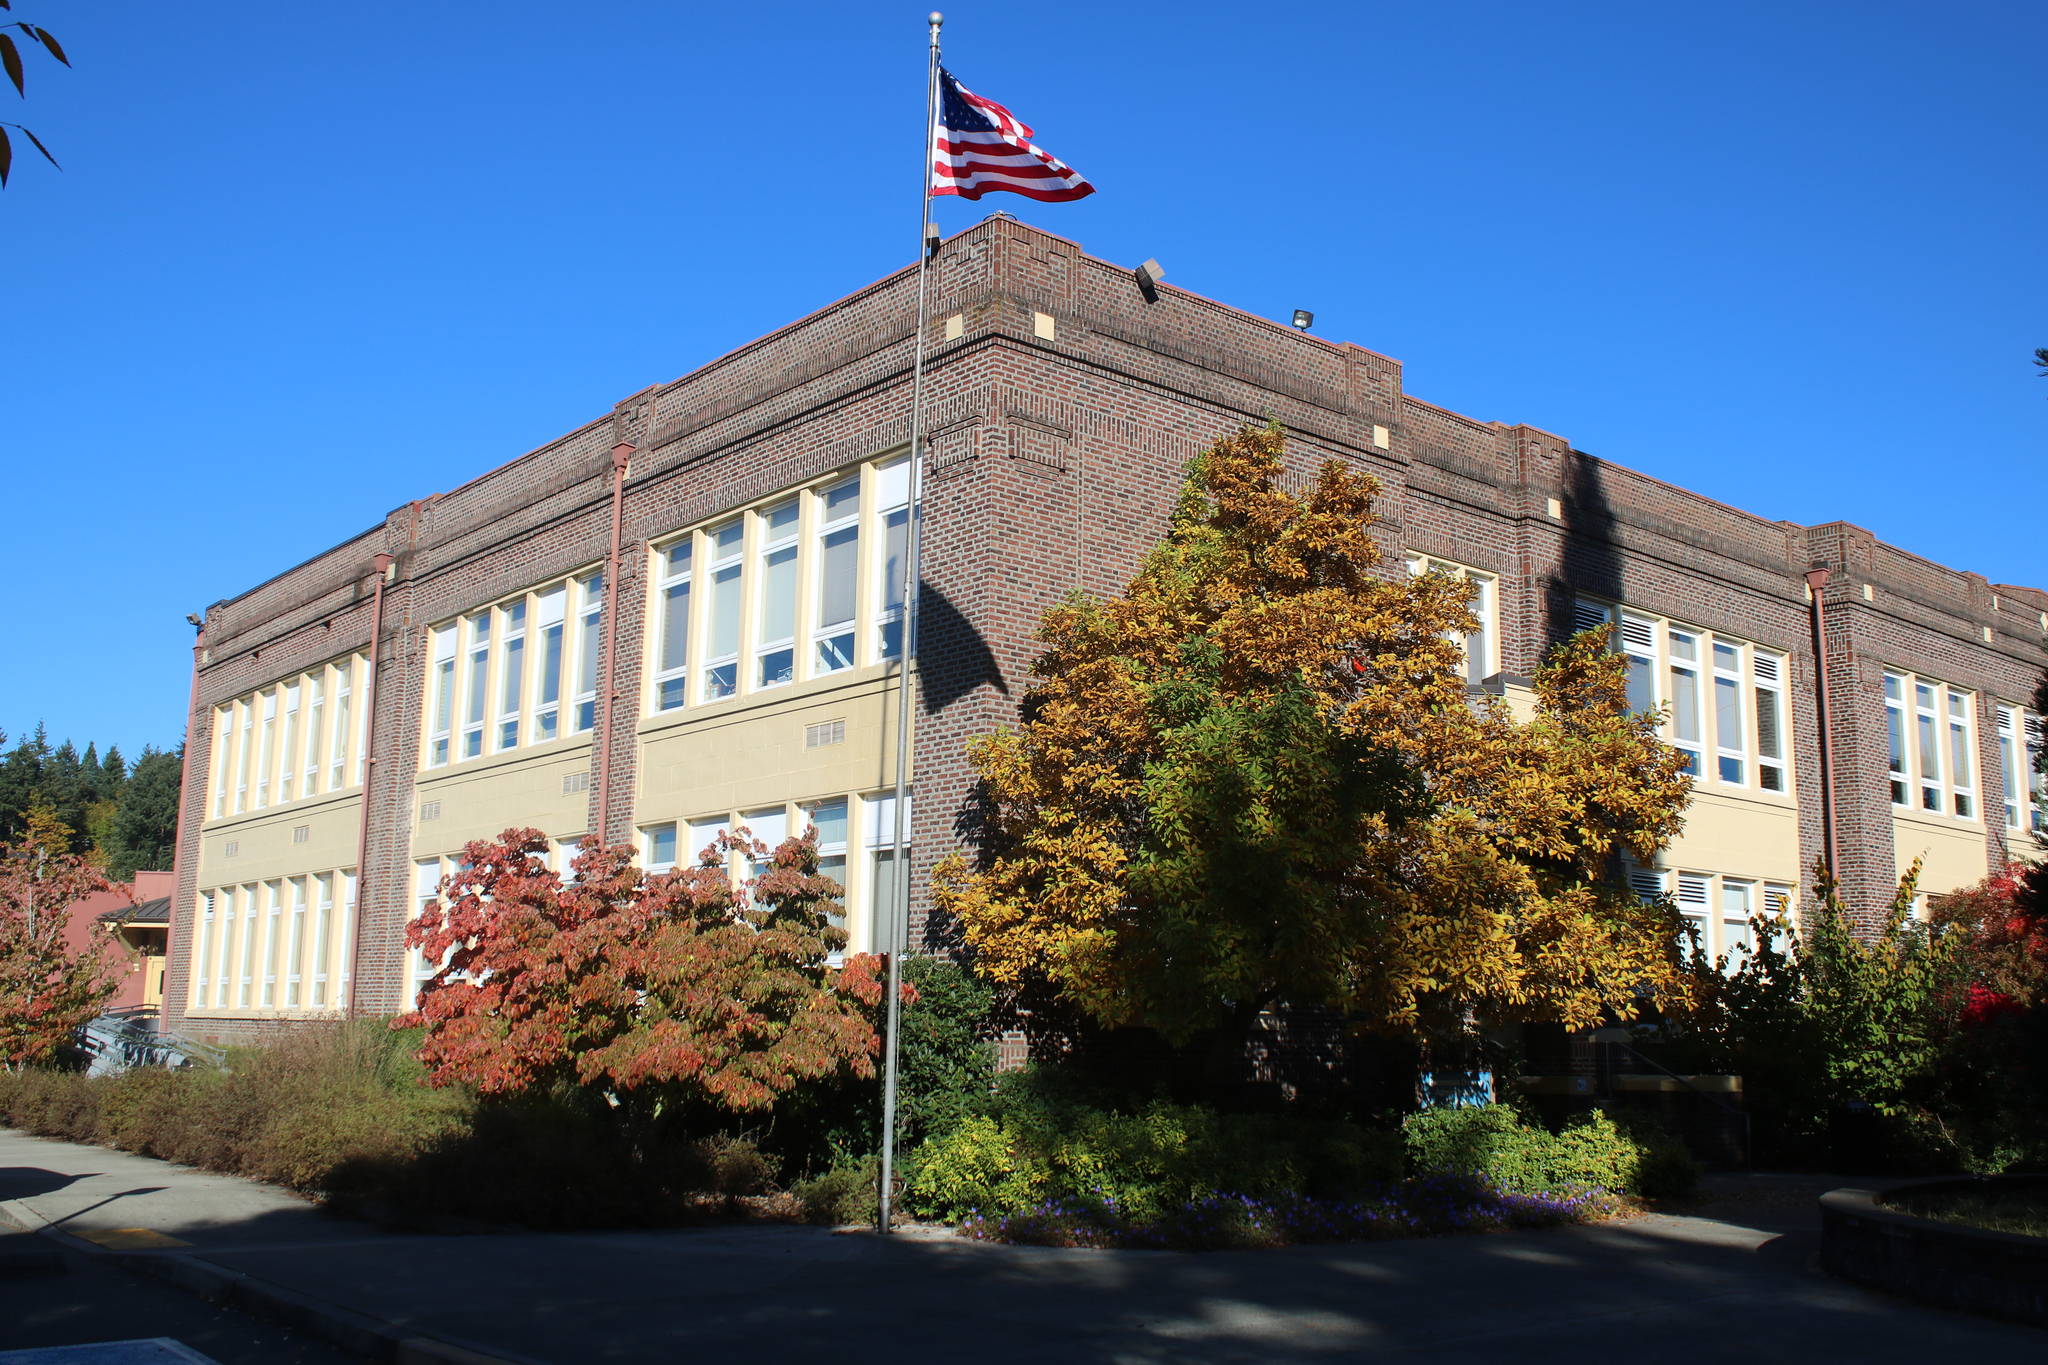 The Old Redmond Schoolhouse has been used as a community center for around two decades. Aaron Kunkler/Redmond Reporter